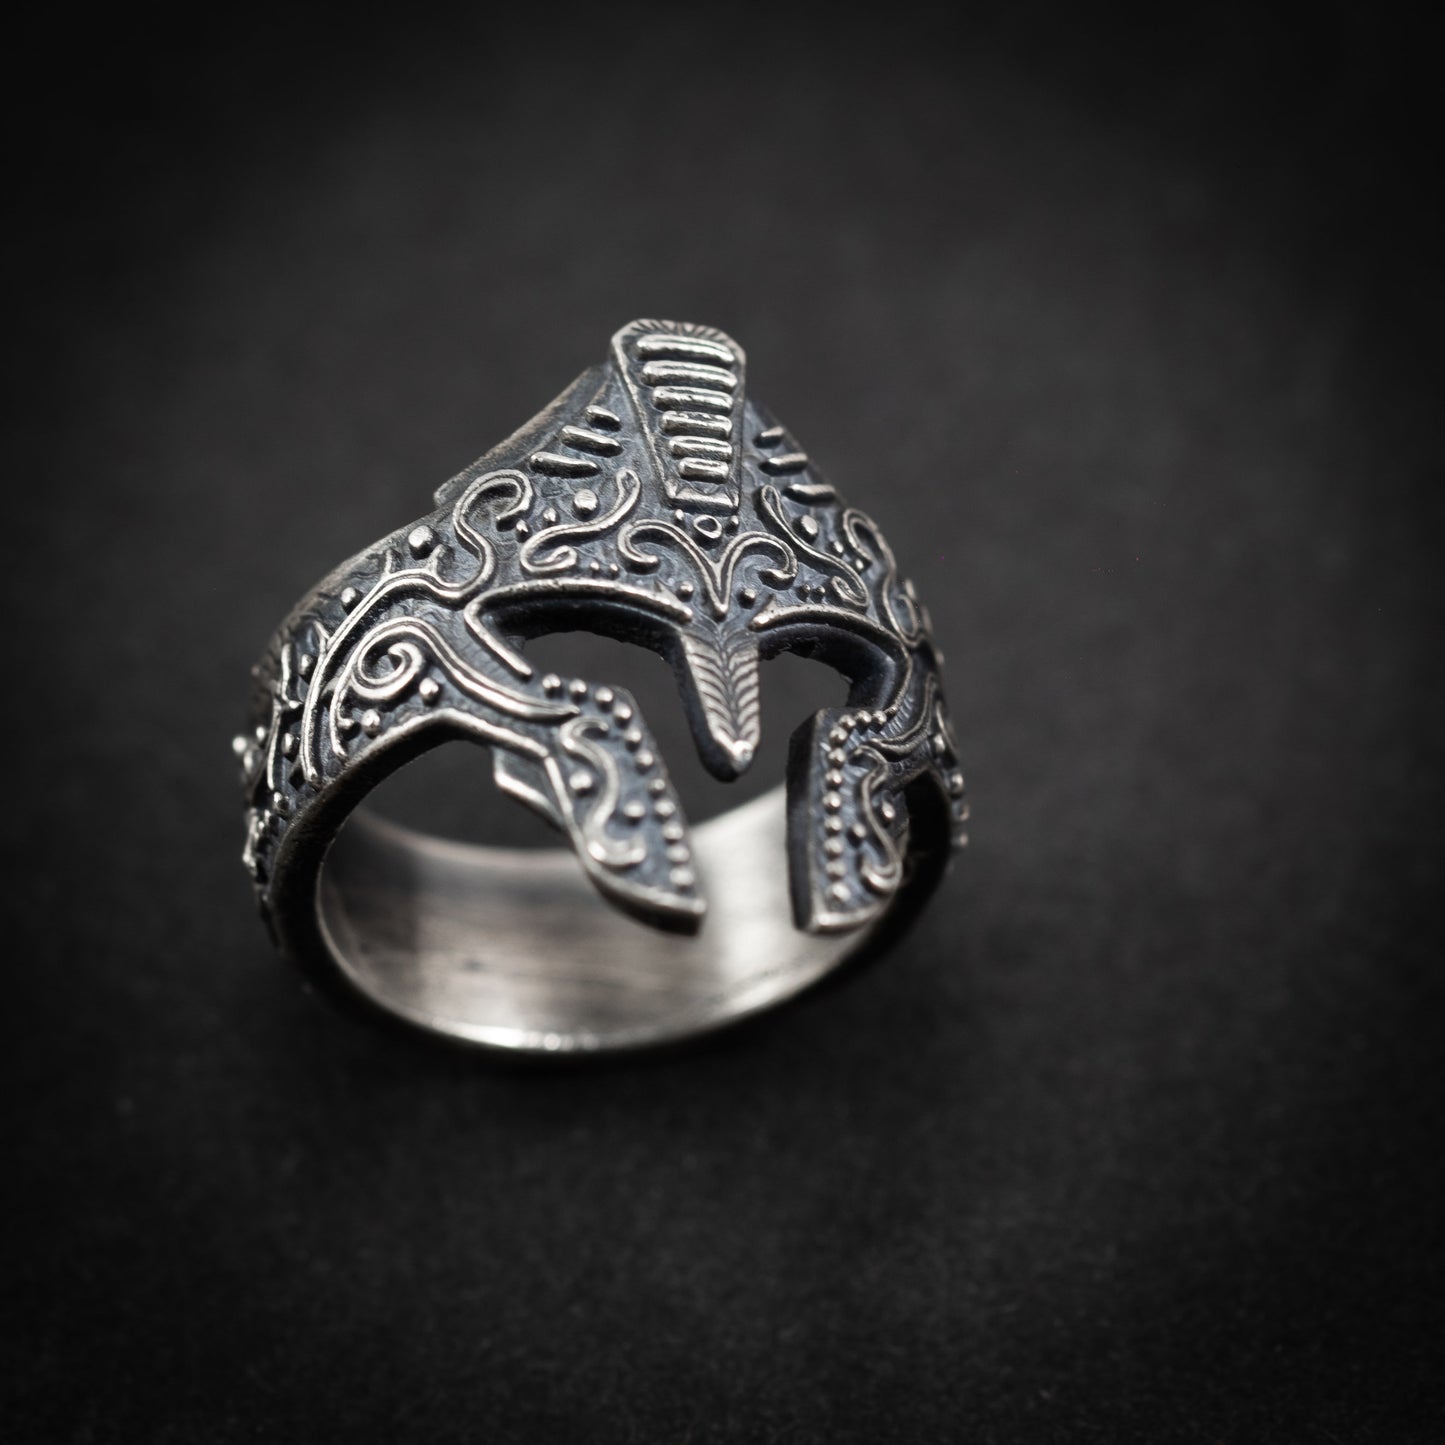 Spartan helmet Warrior Men silver ring, Unique gift for men, Oxidized rustic jewelry for men, ancient greek ring, mens gift